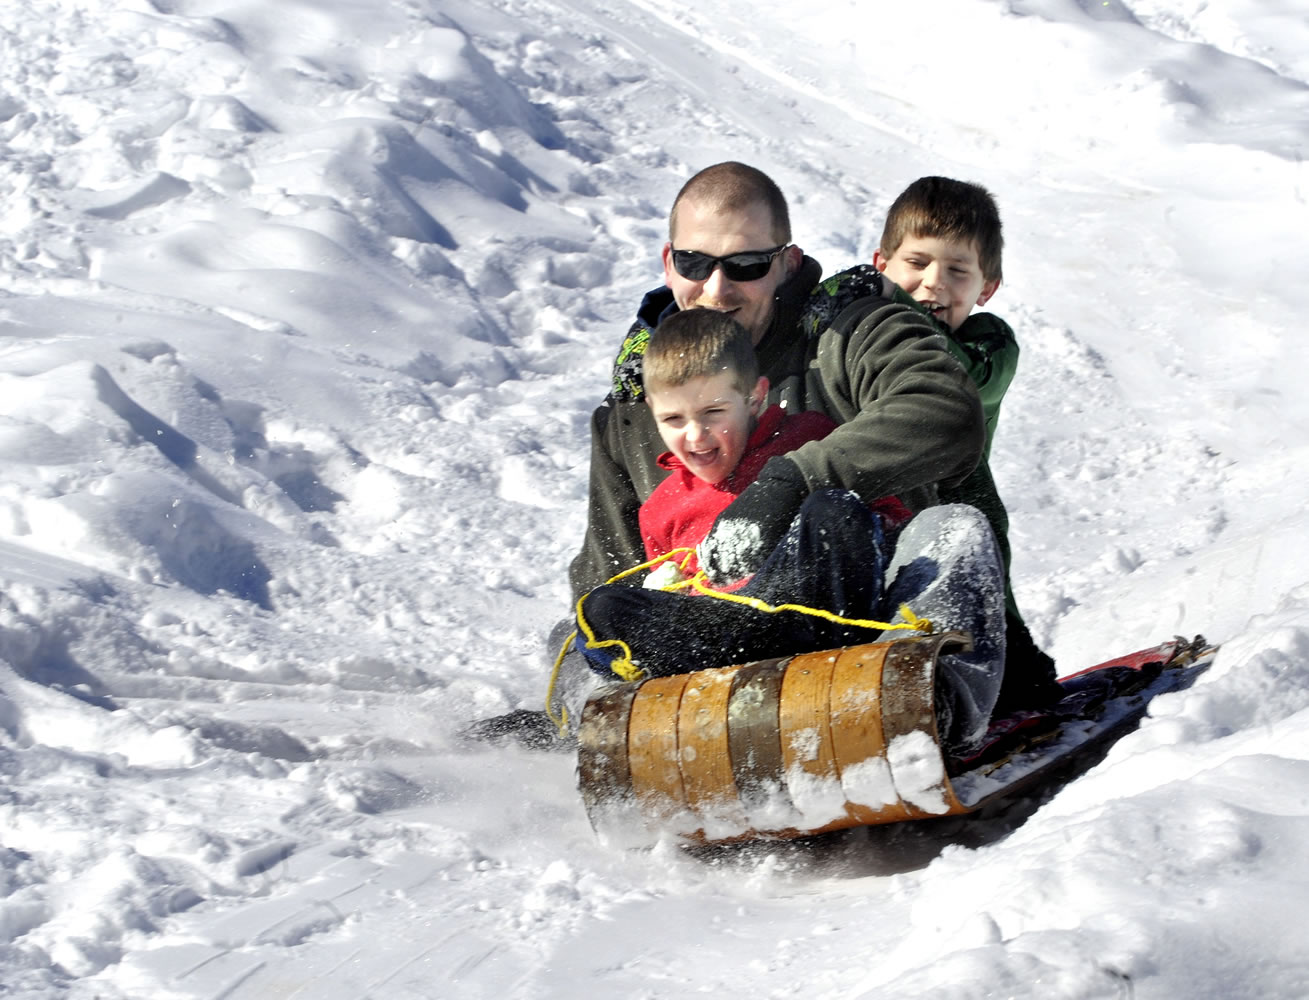 Josh Davis Bloomsburg, Pa., and his sons, Kaden, front, 5, and Cole, 8, ride a toboggan downhill at Joshis cousin Barry J.